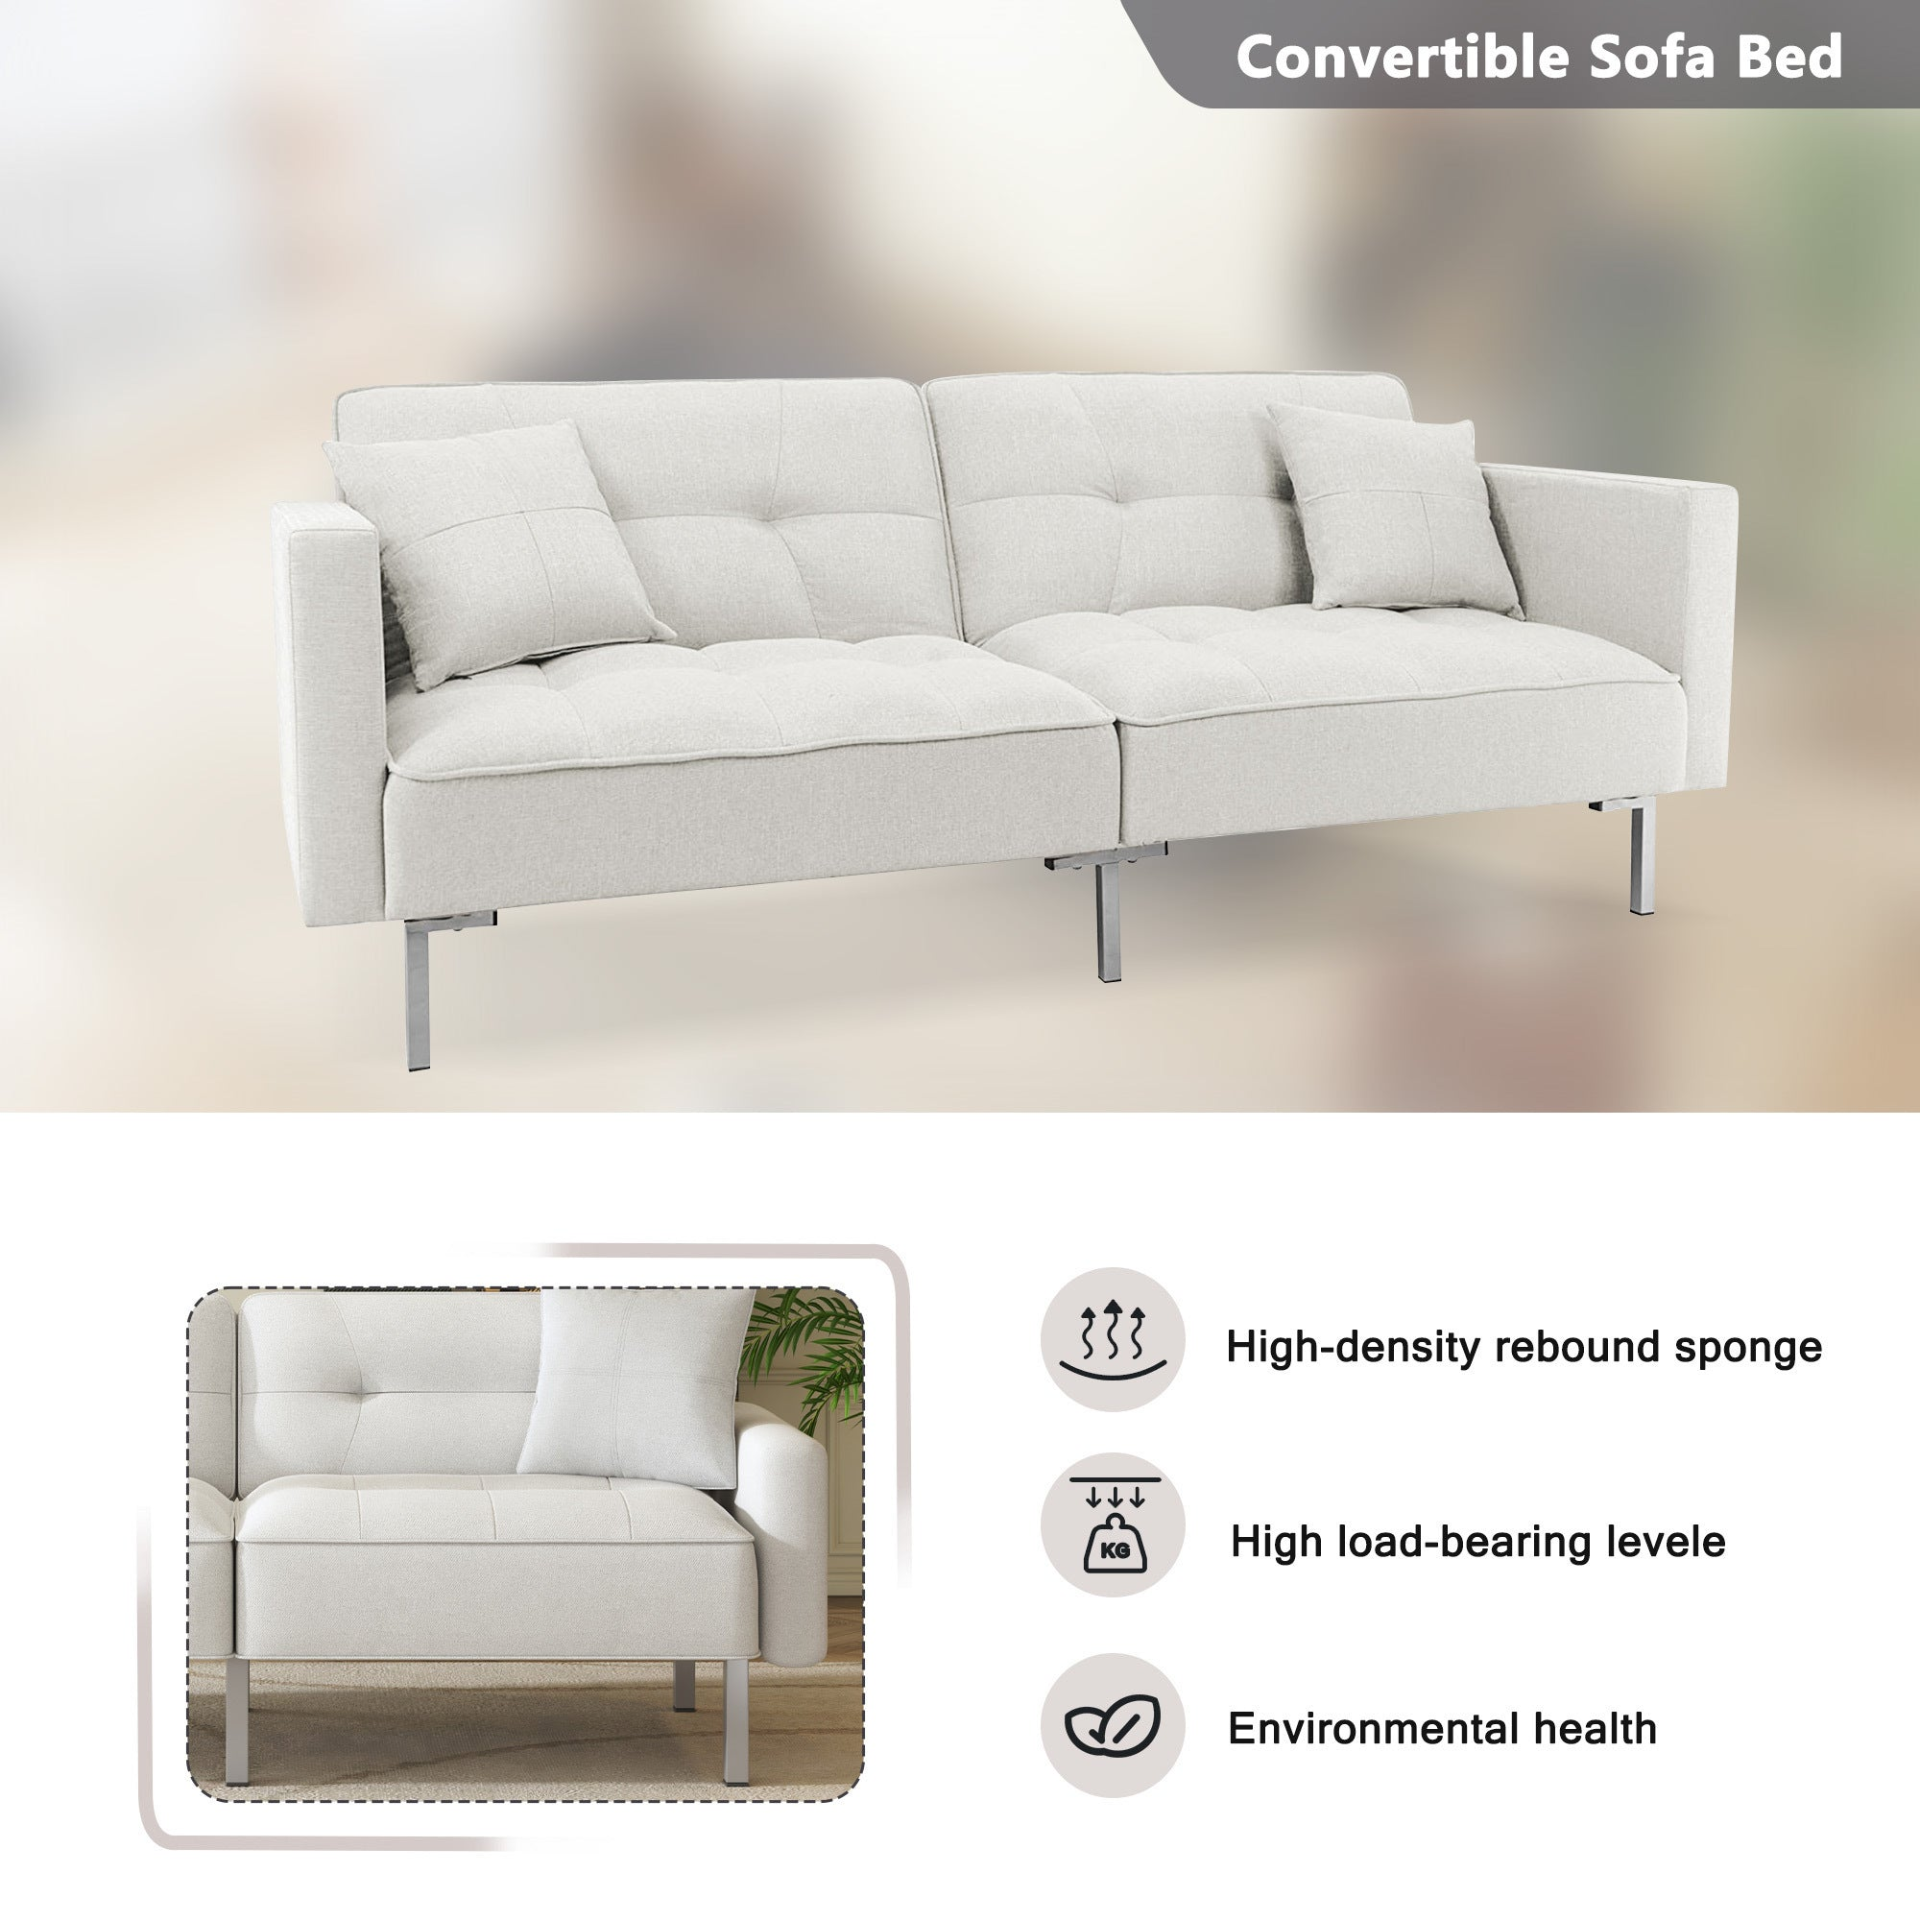 75.6"  Linen Upholstered Modern Convertible Folding Futon Sofa Bed for Compact Living Space, Apartment, Dorm Môdern Space Gallery